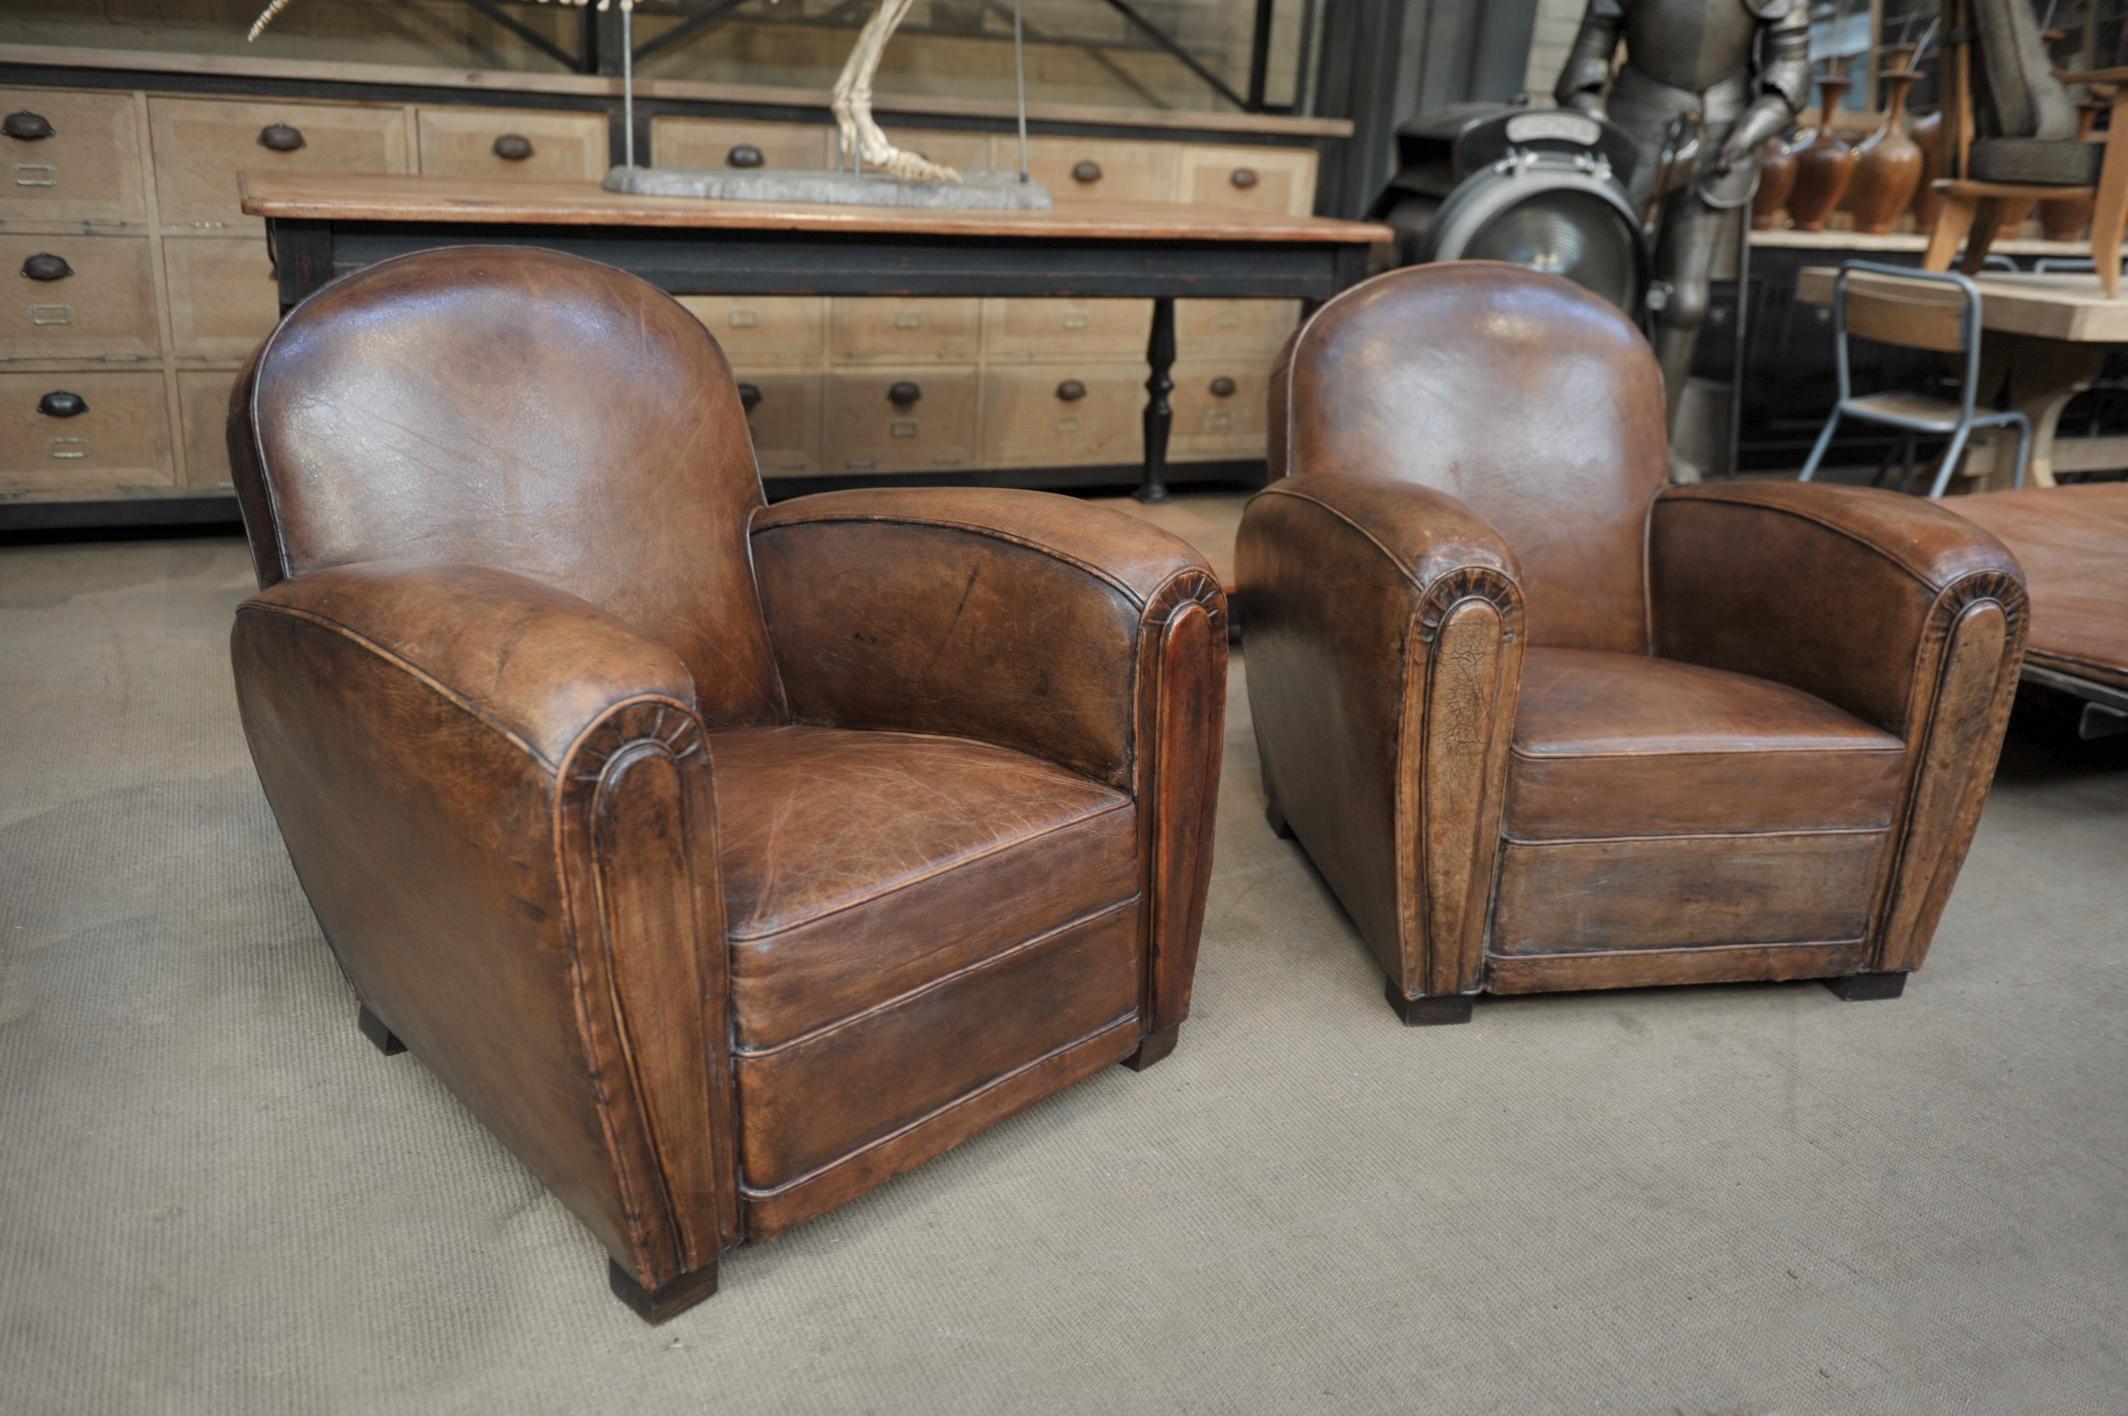 Pair of French leather club chairs with original brown leather 1950 Very good condition, very little scratches and one hall in the back see last picture. Very comfortable.